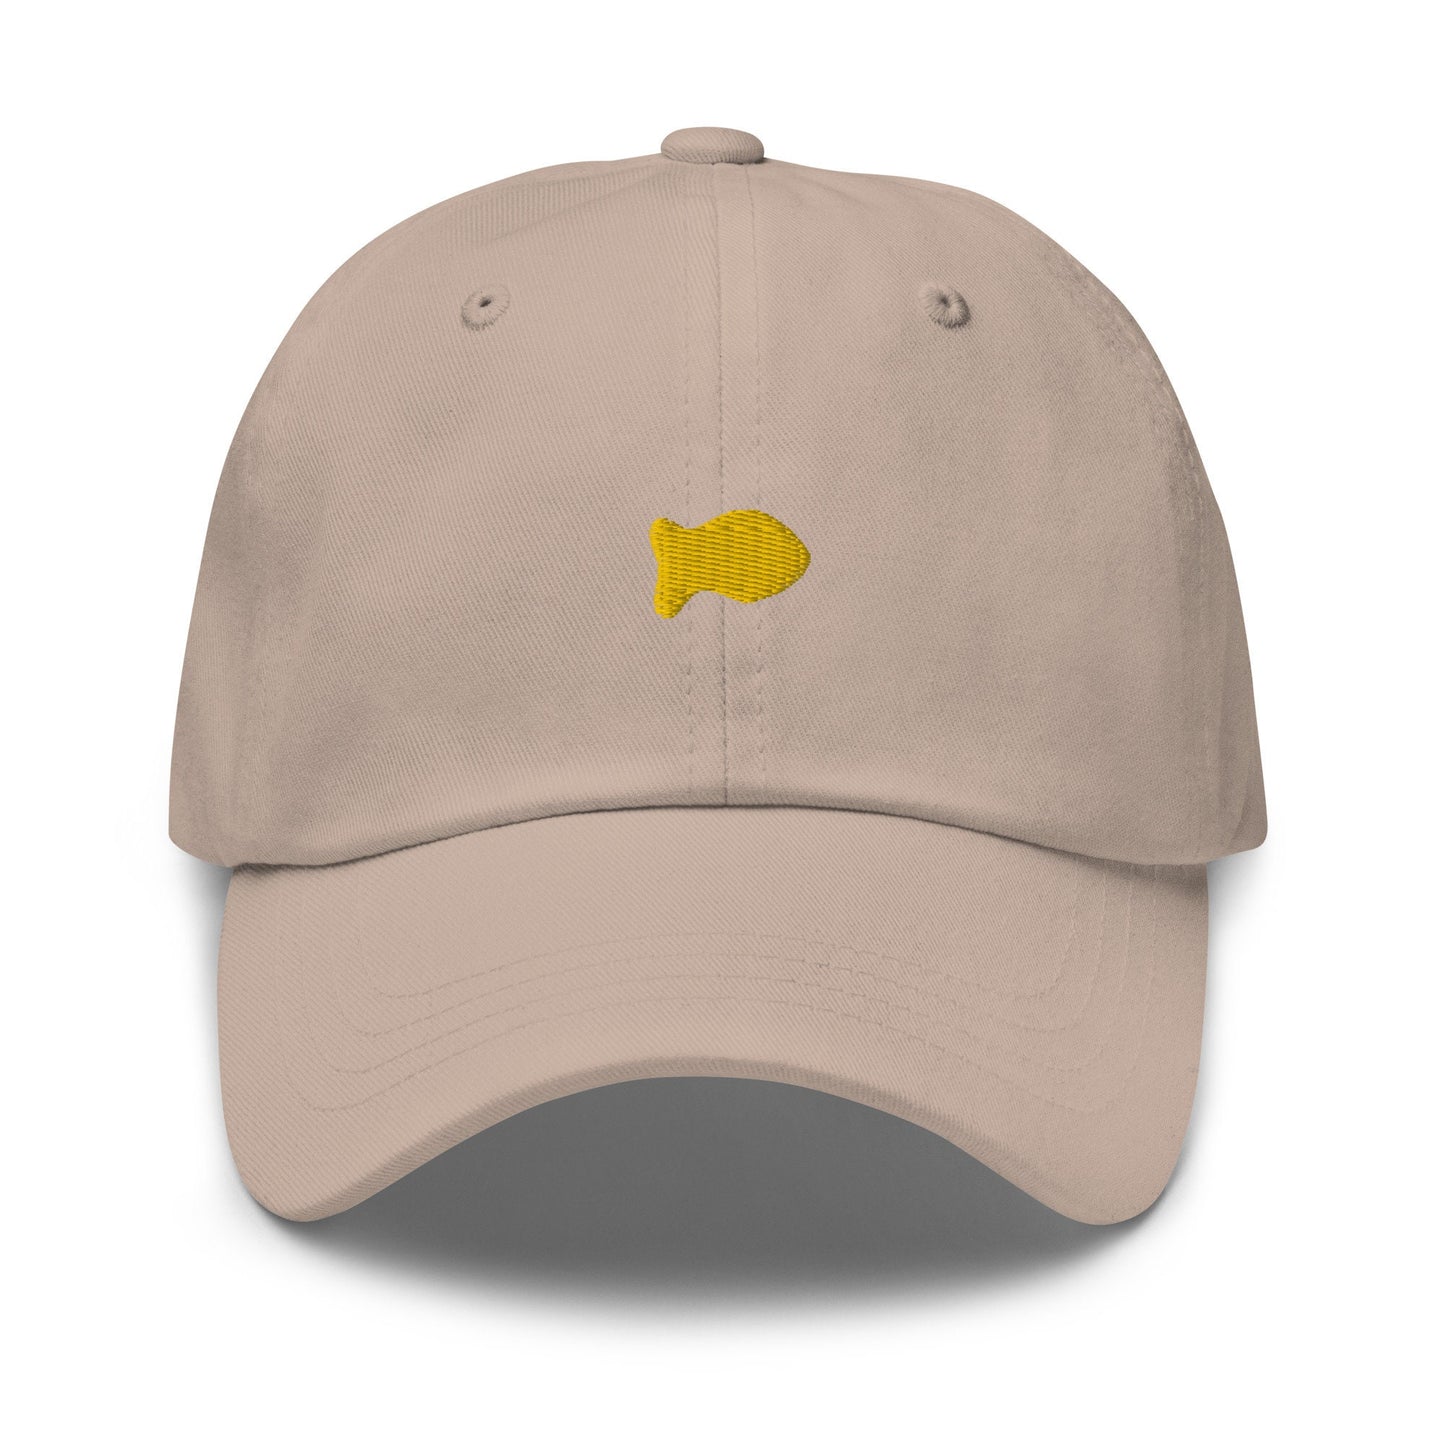 Goldfish Dad Hat - Gift for Cheesy Snack Fans - Minimalist Cotton Embroidered Cap